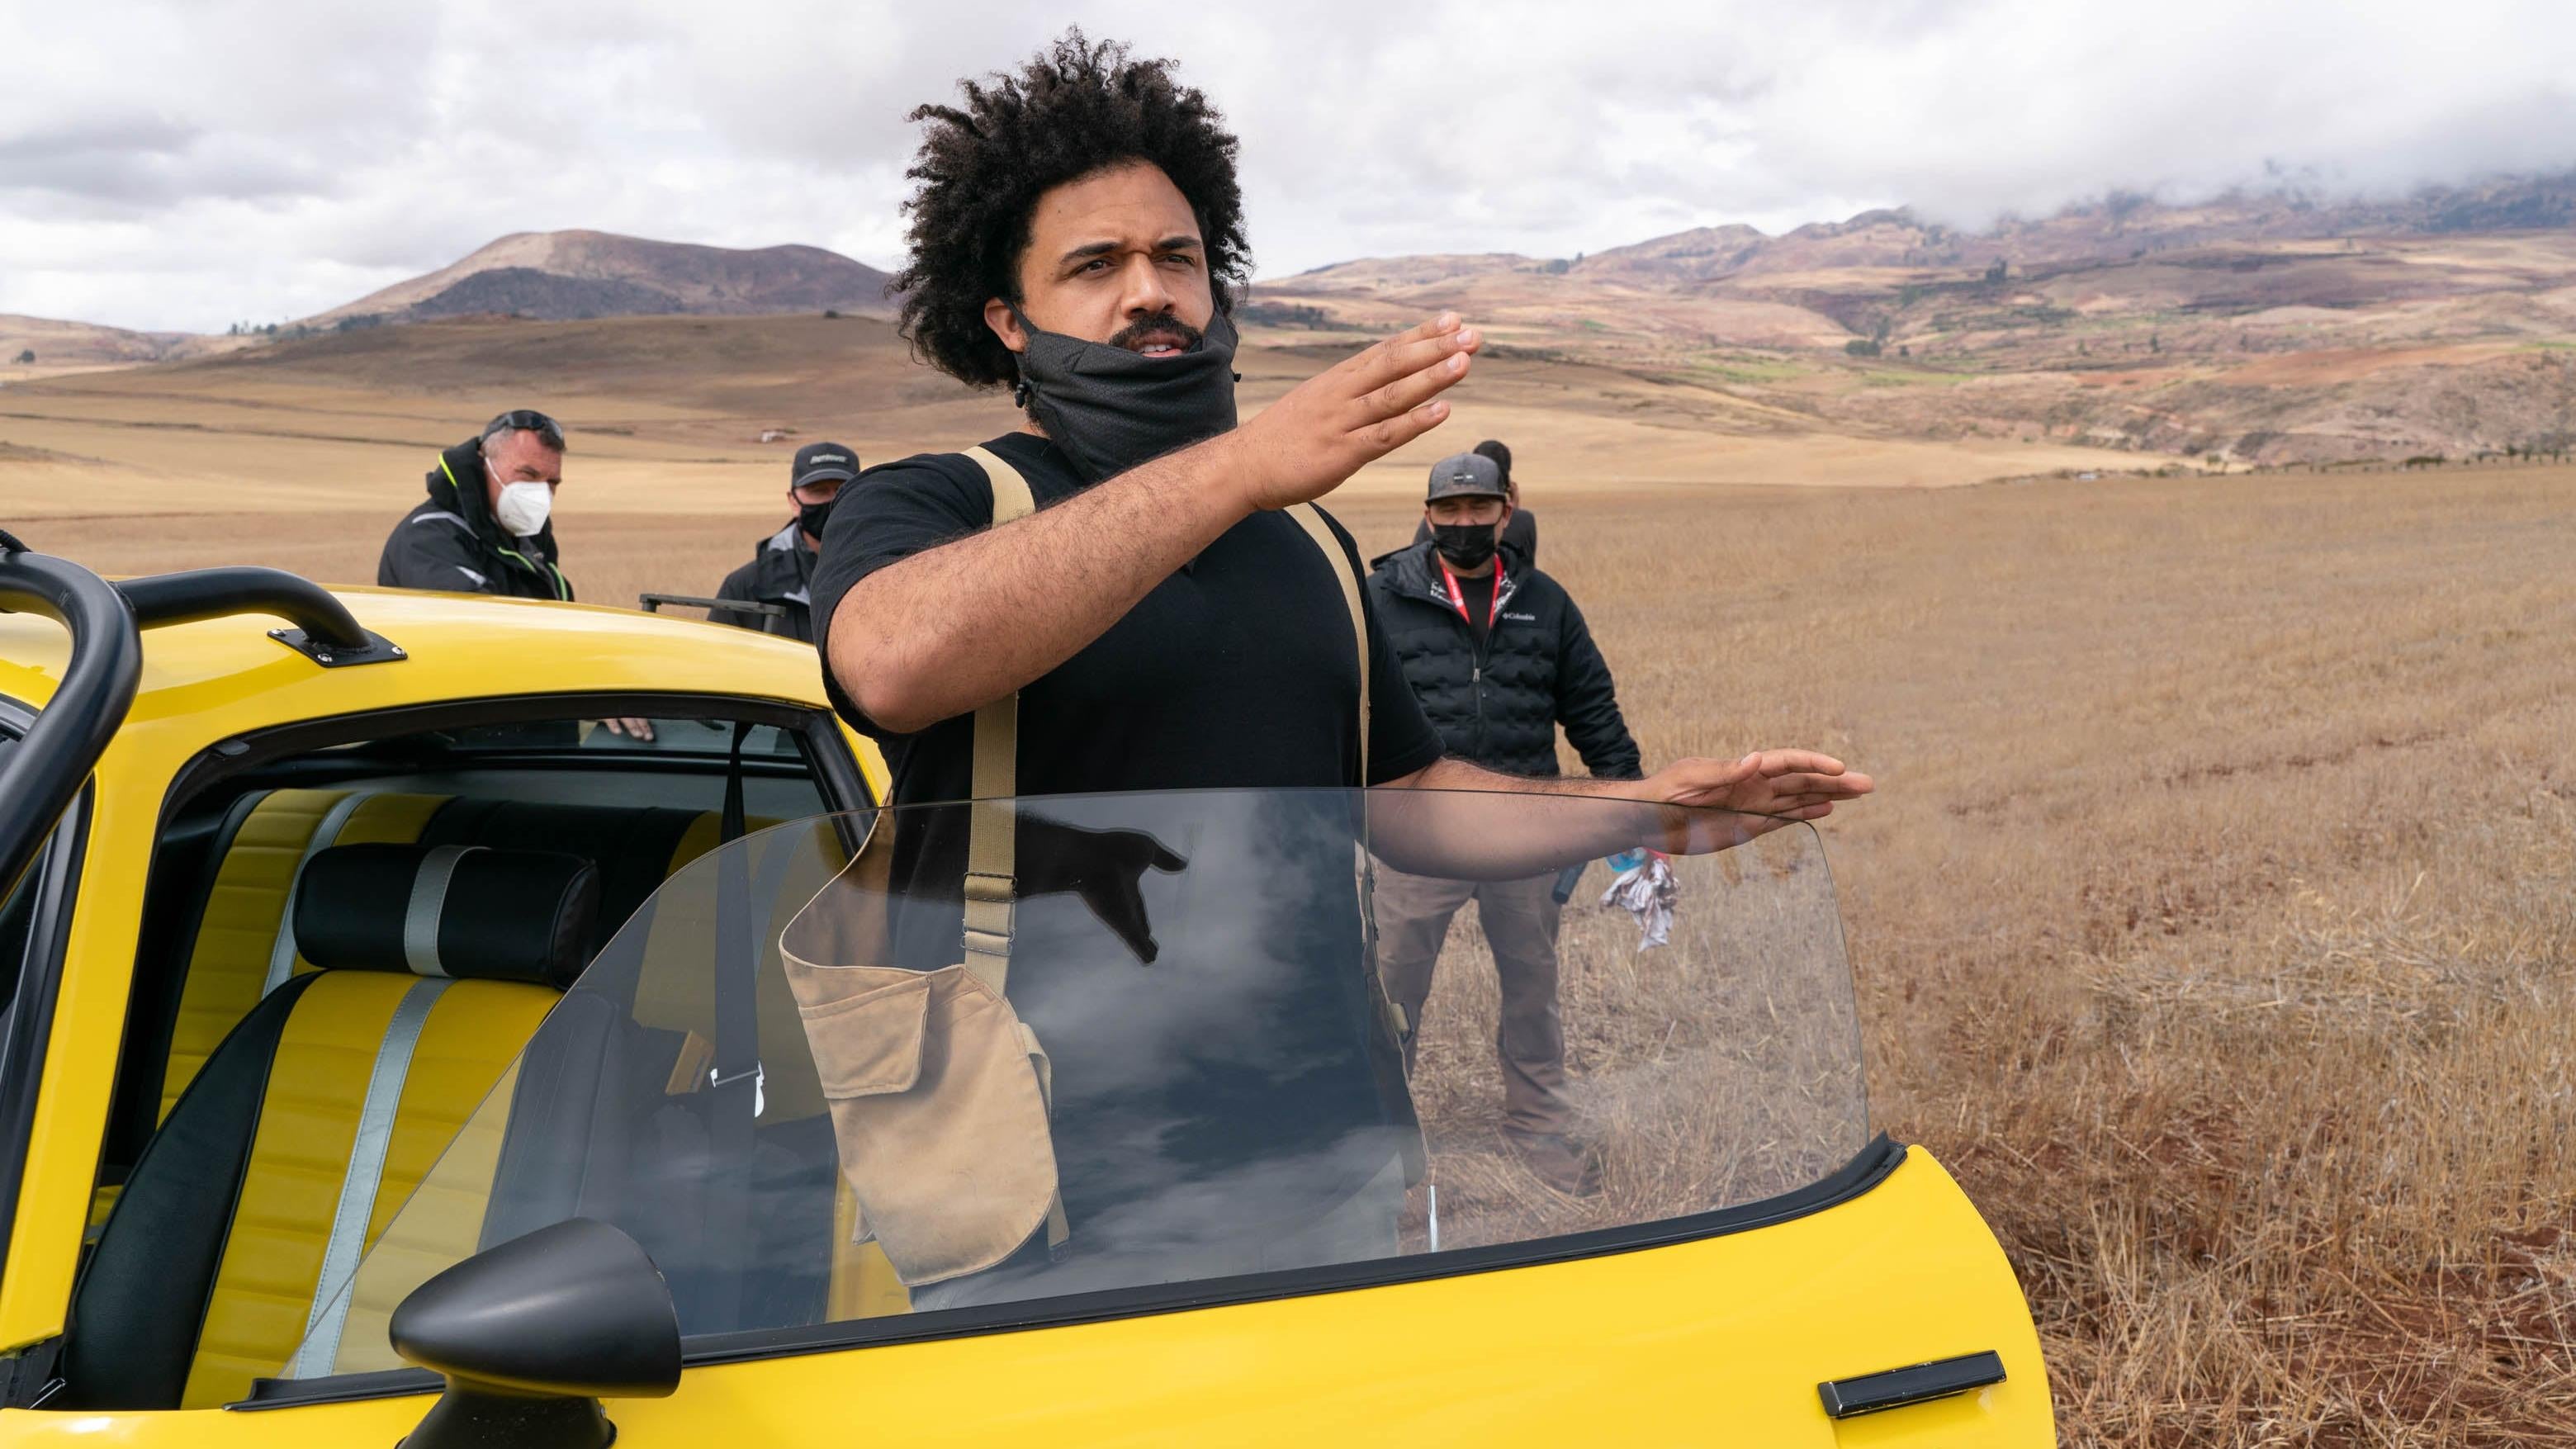 Steven Caple Jr. directing Rise of the Beasts. (Image: Paramount)